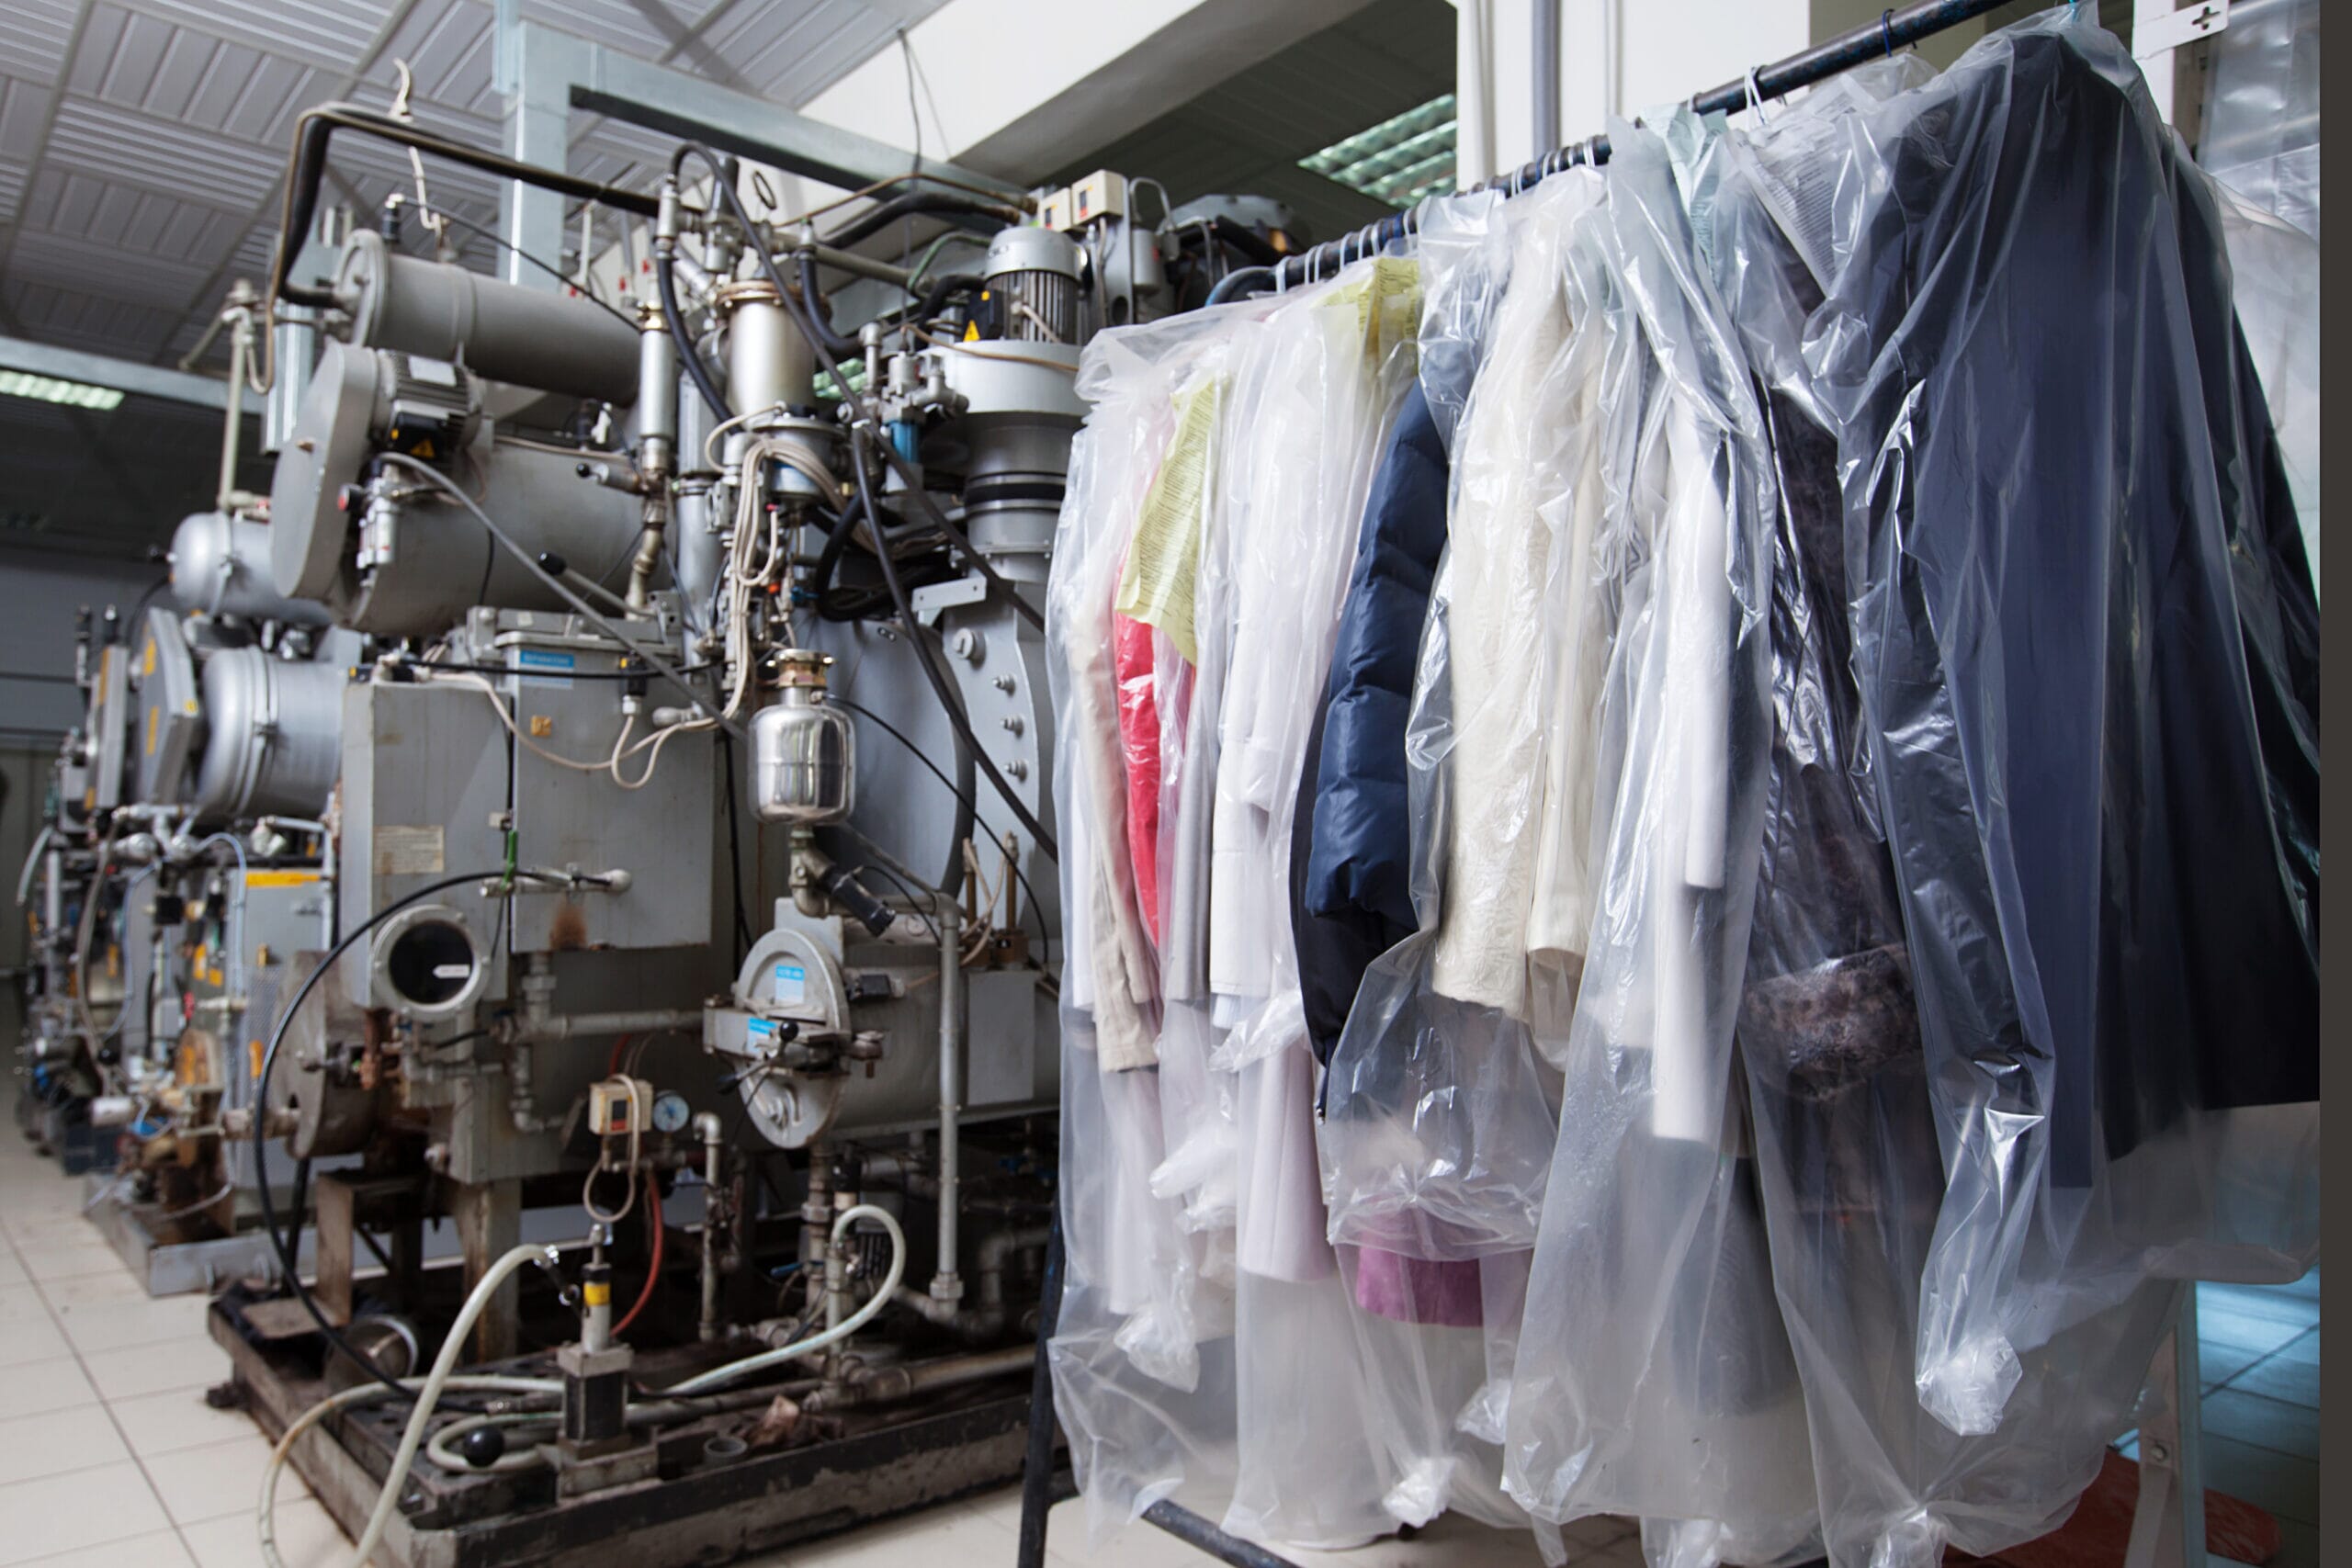 How to Pick the Right Air Compressor for Your Dry Cleaning Business